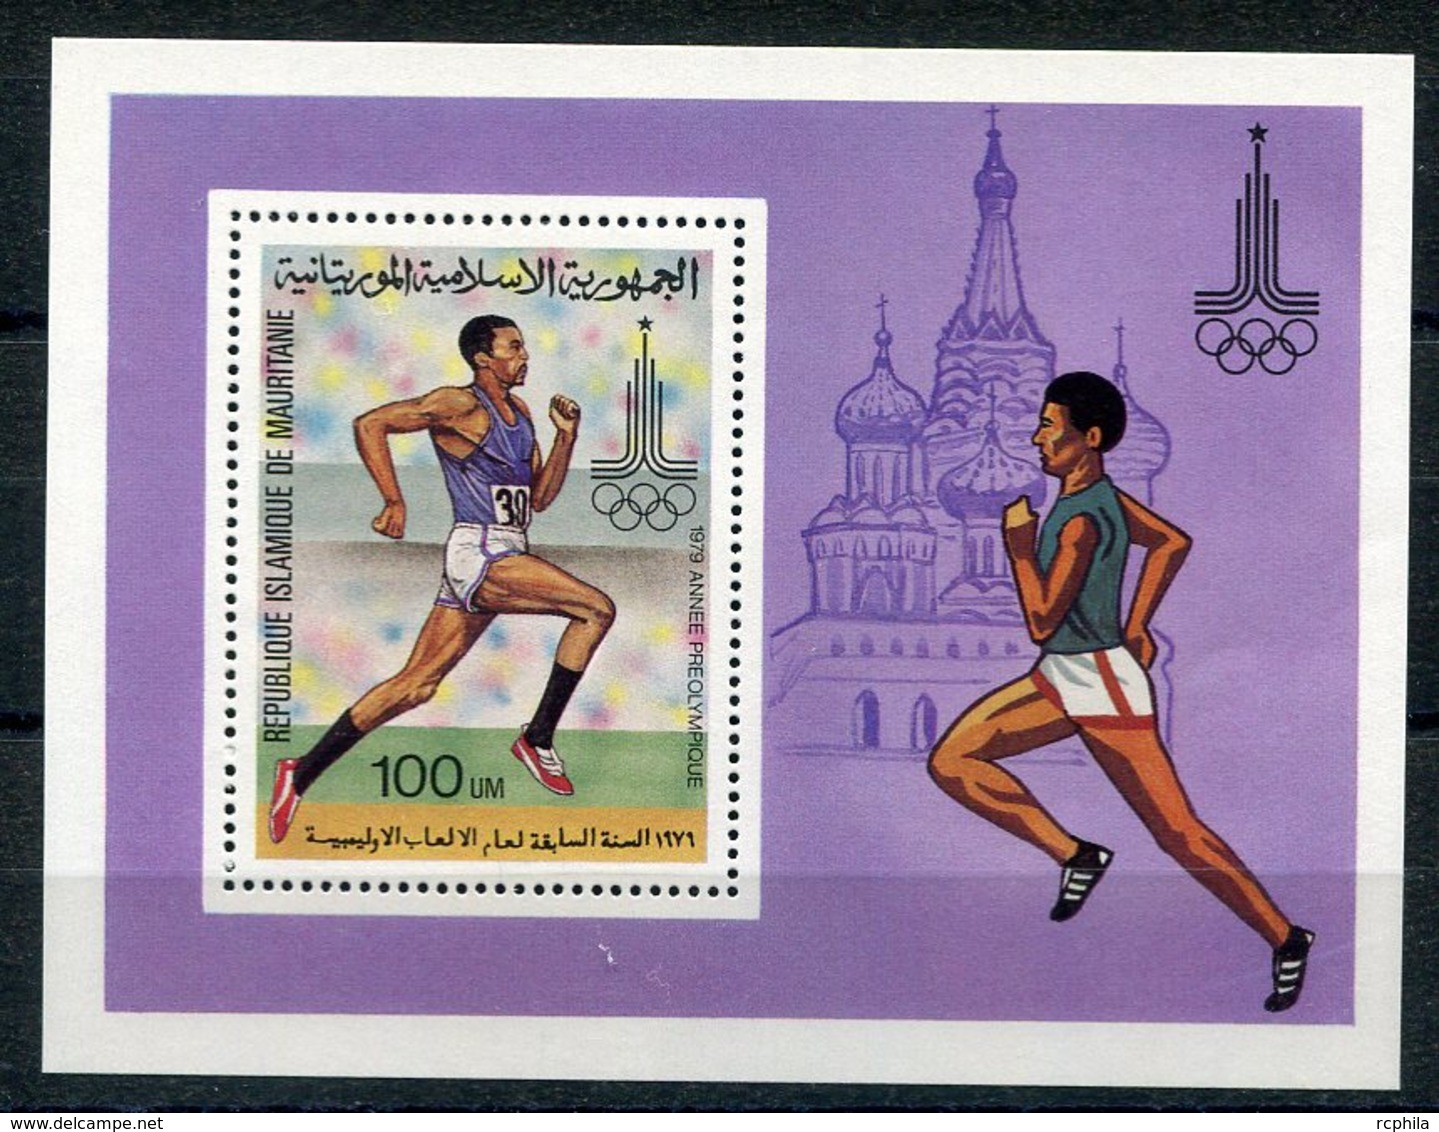 RC 15162 MAURITANIE PREOLYMPIQUES D'ETE MOSCOU BLOC FEUILLET NEUF ** MNH TB - Niger (1960-...)